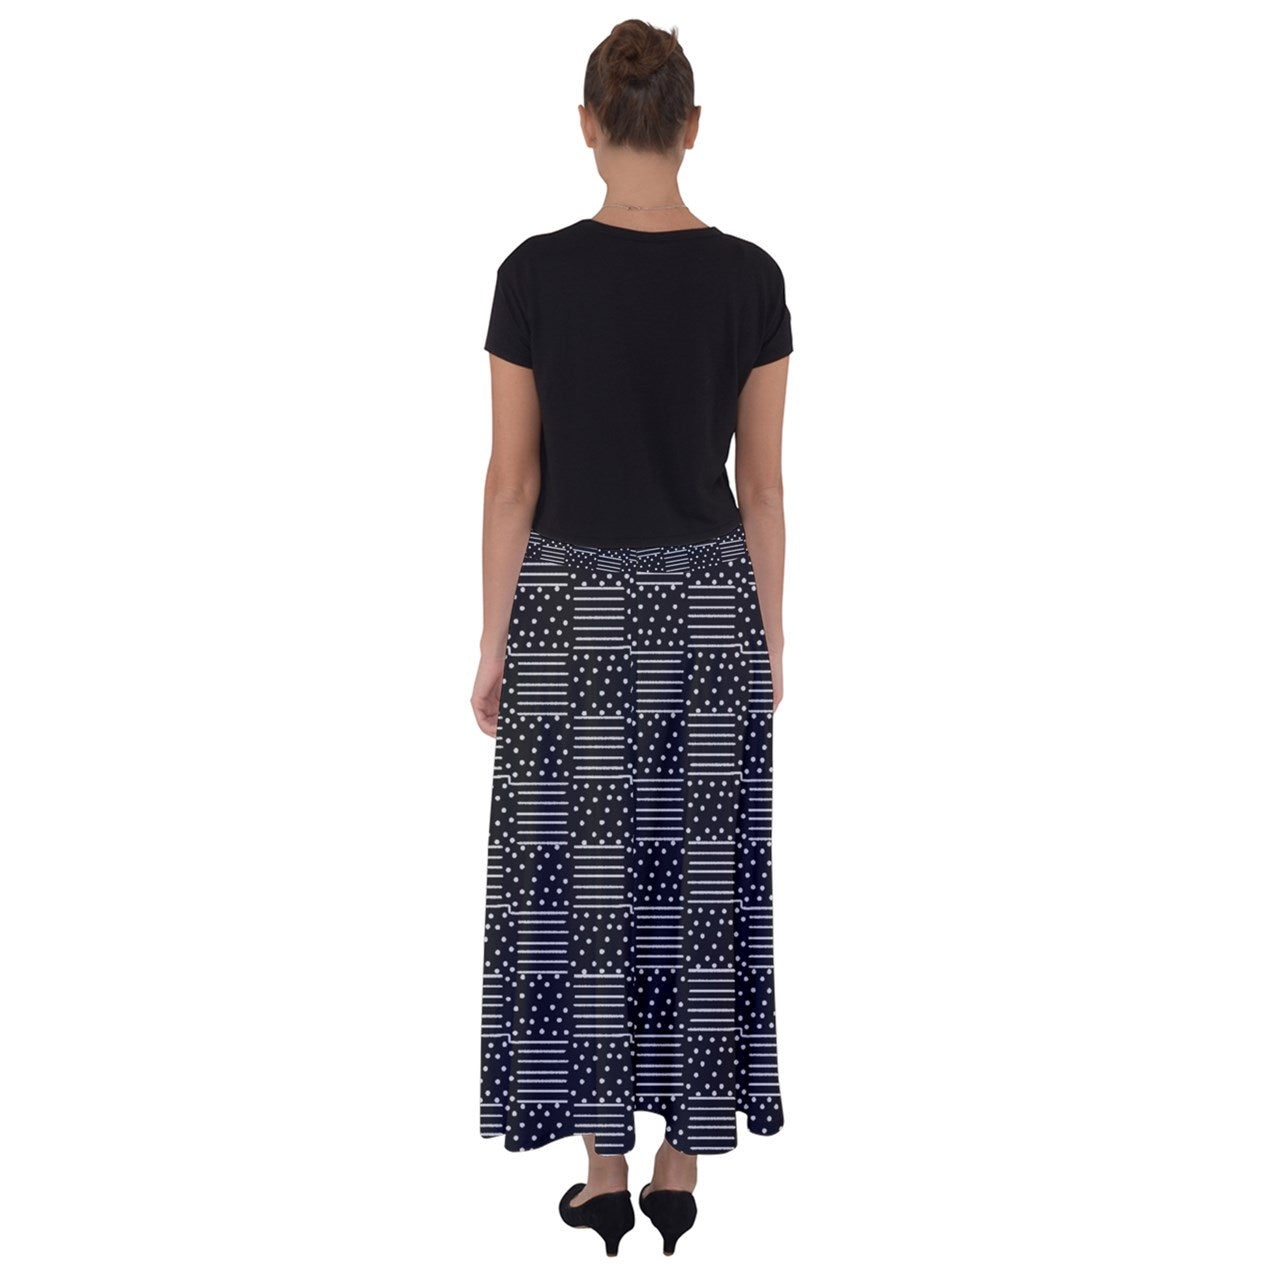 Scars Of The Night Flared Maxi Skirt